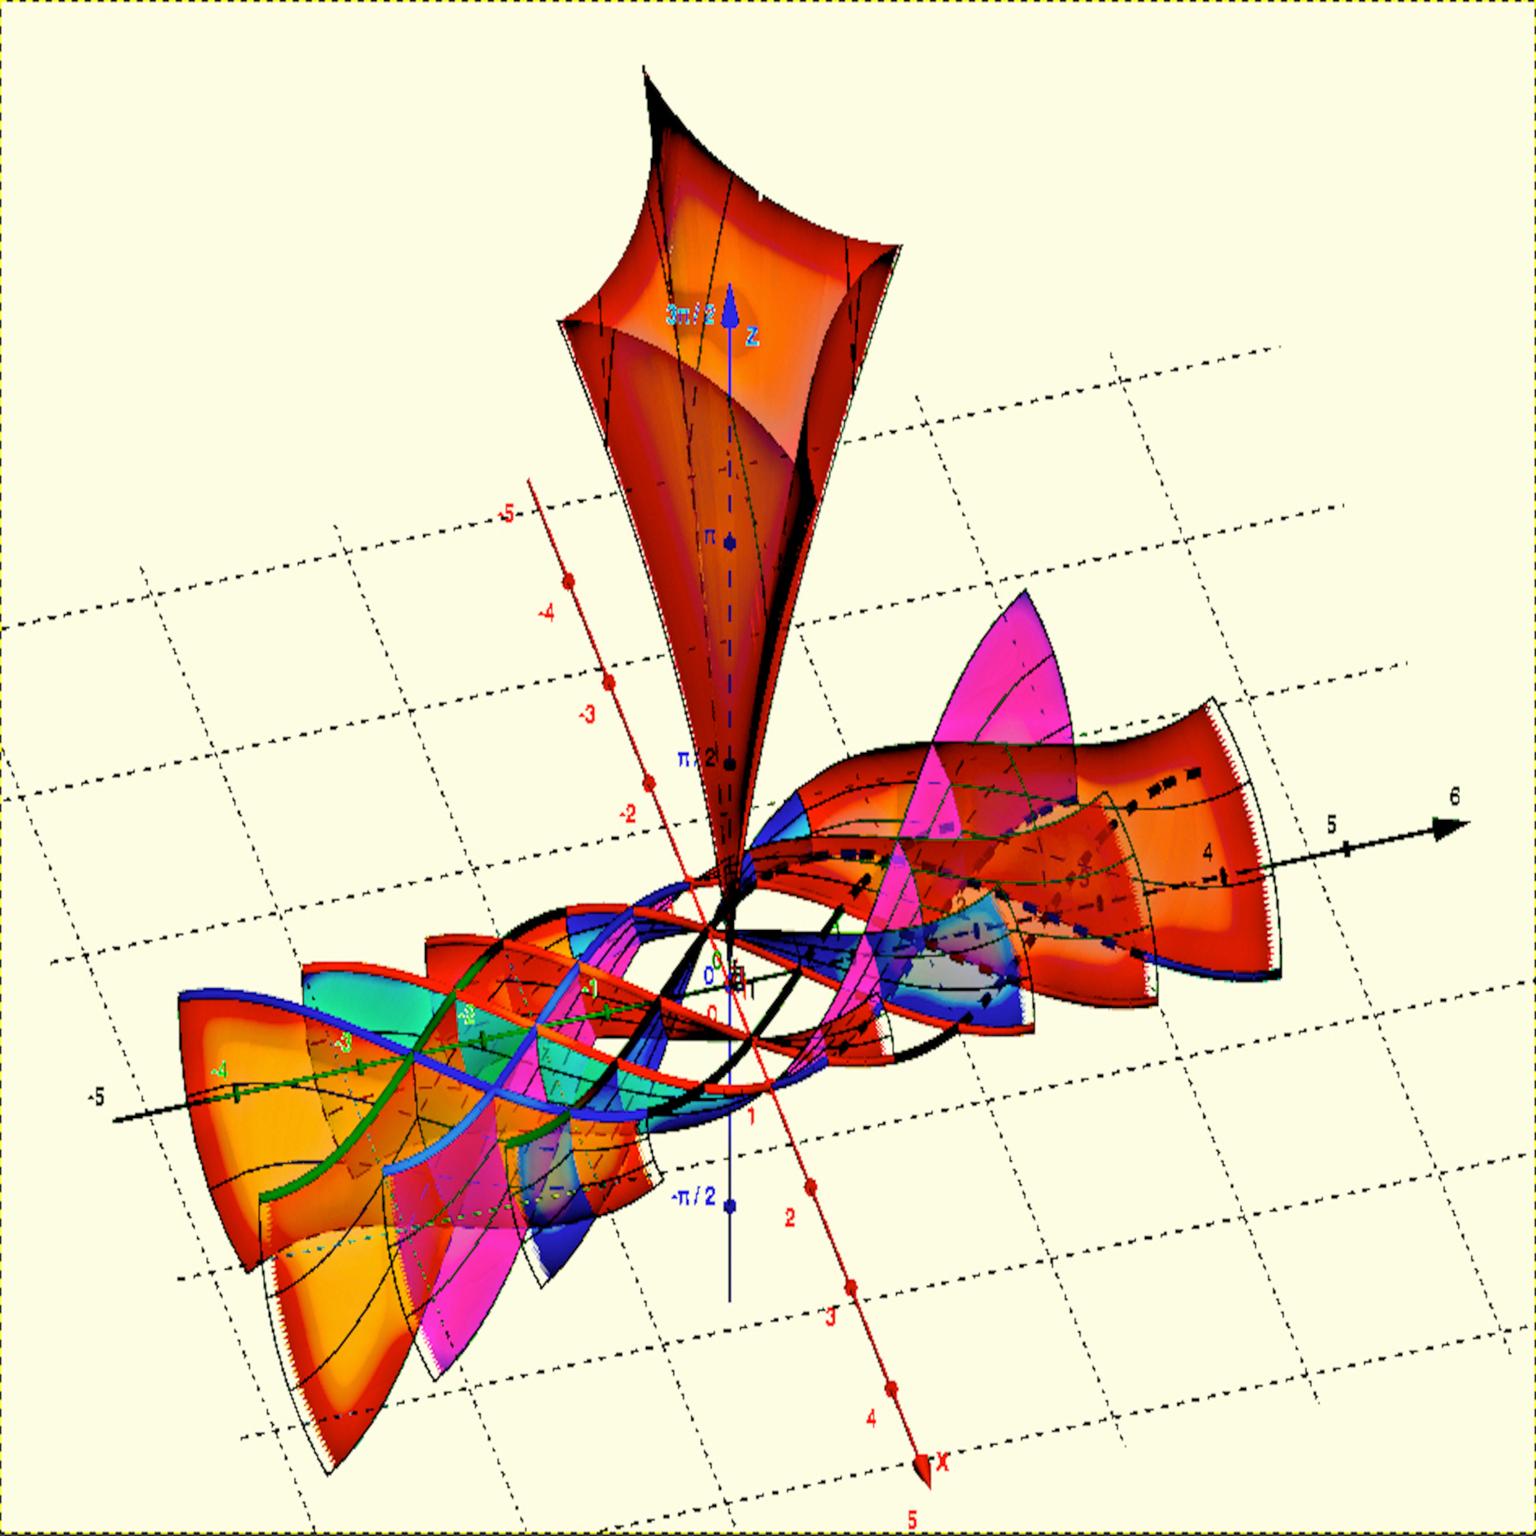 Image for entry 'Symphony of Transformations: A Visual Exploration of 3D Rotations in Mathematical Functions'